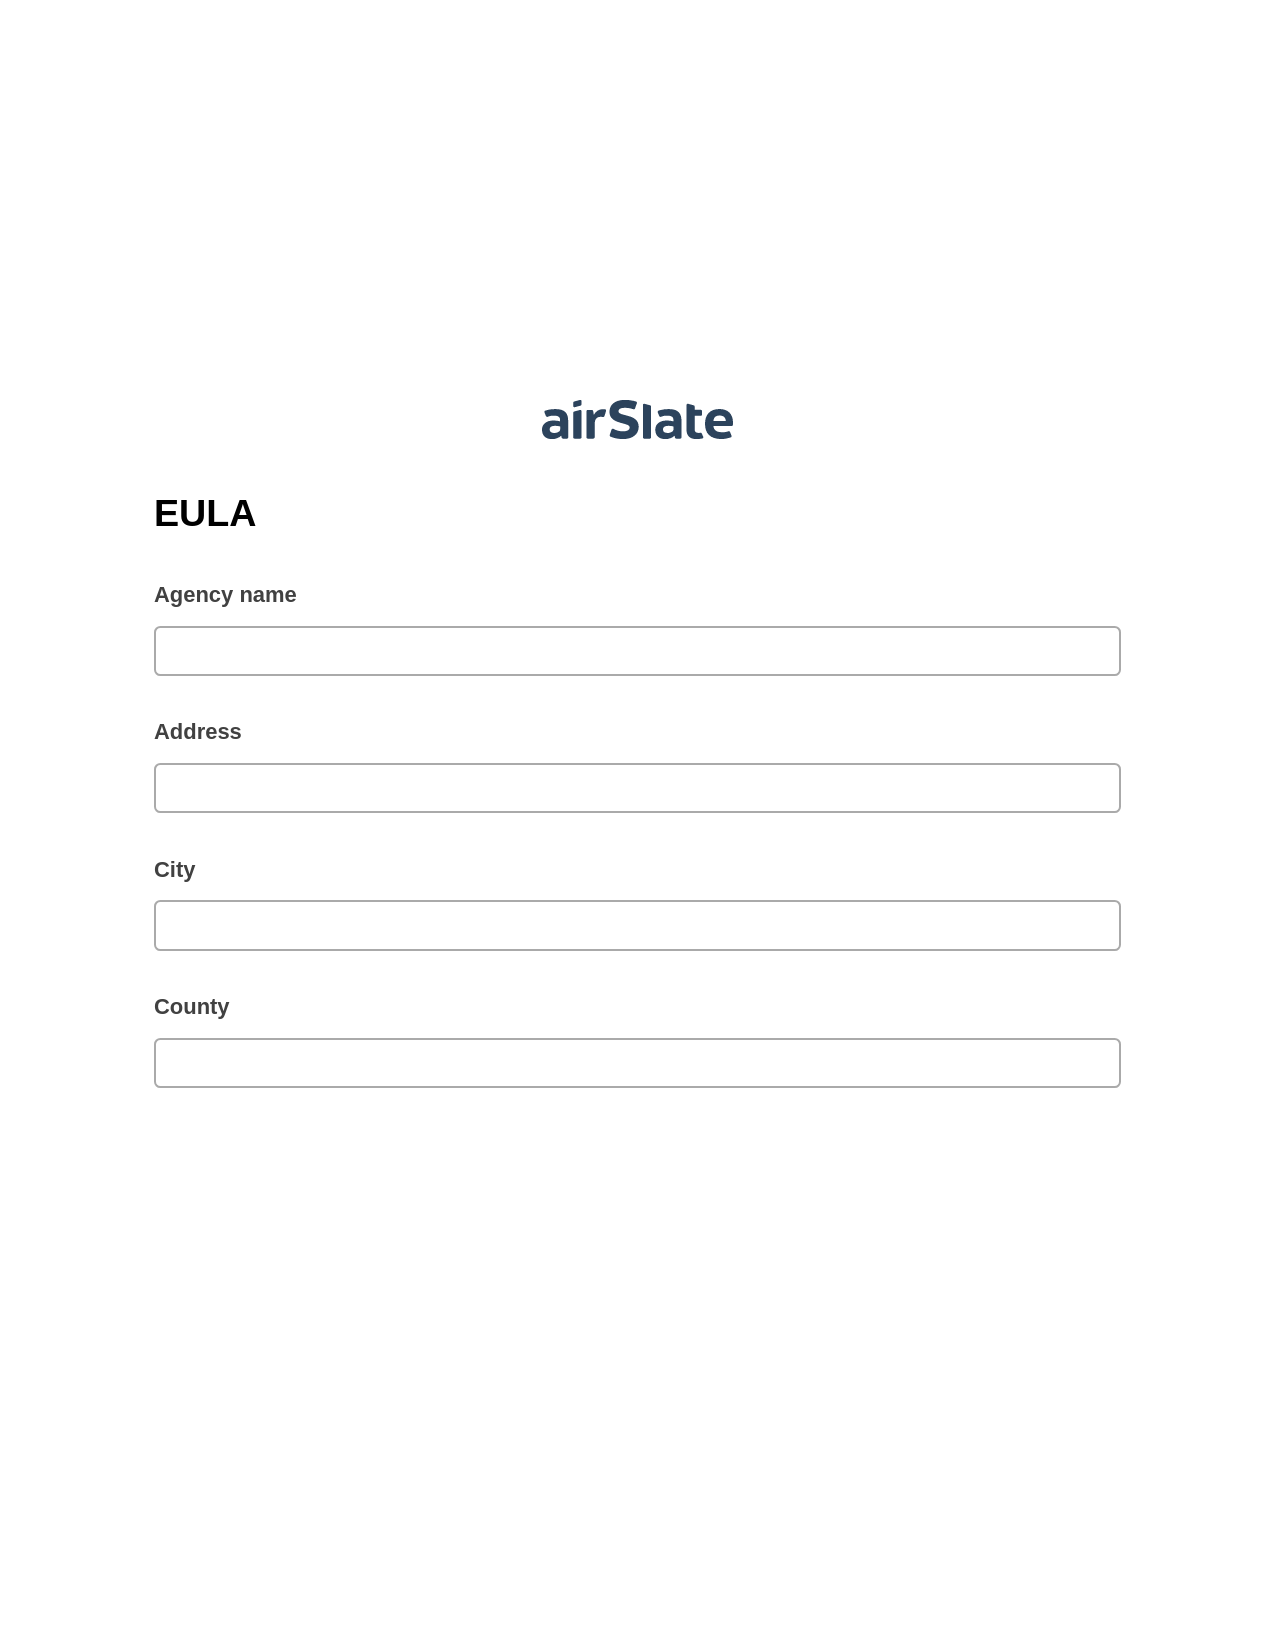 EULA Pre-fill from Google Sheet Dropdown Options Bot, Remove Tags From Slate Bot, Box Bot